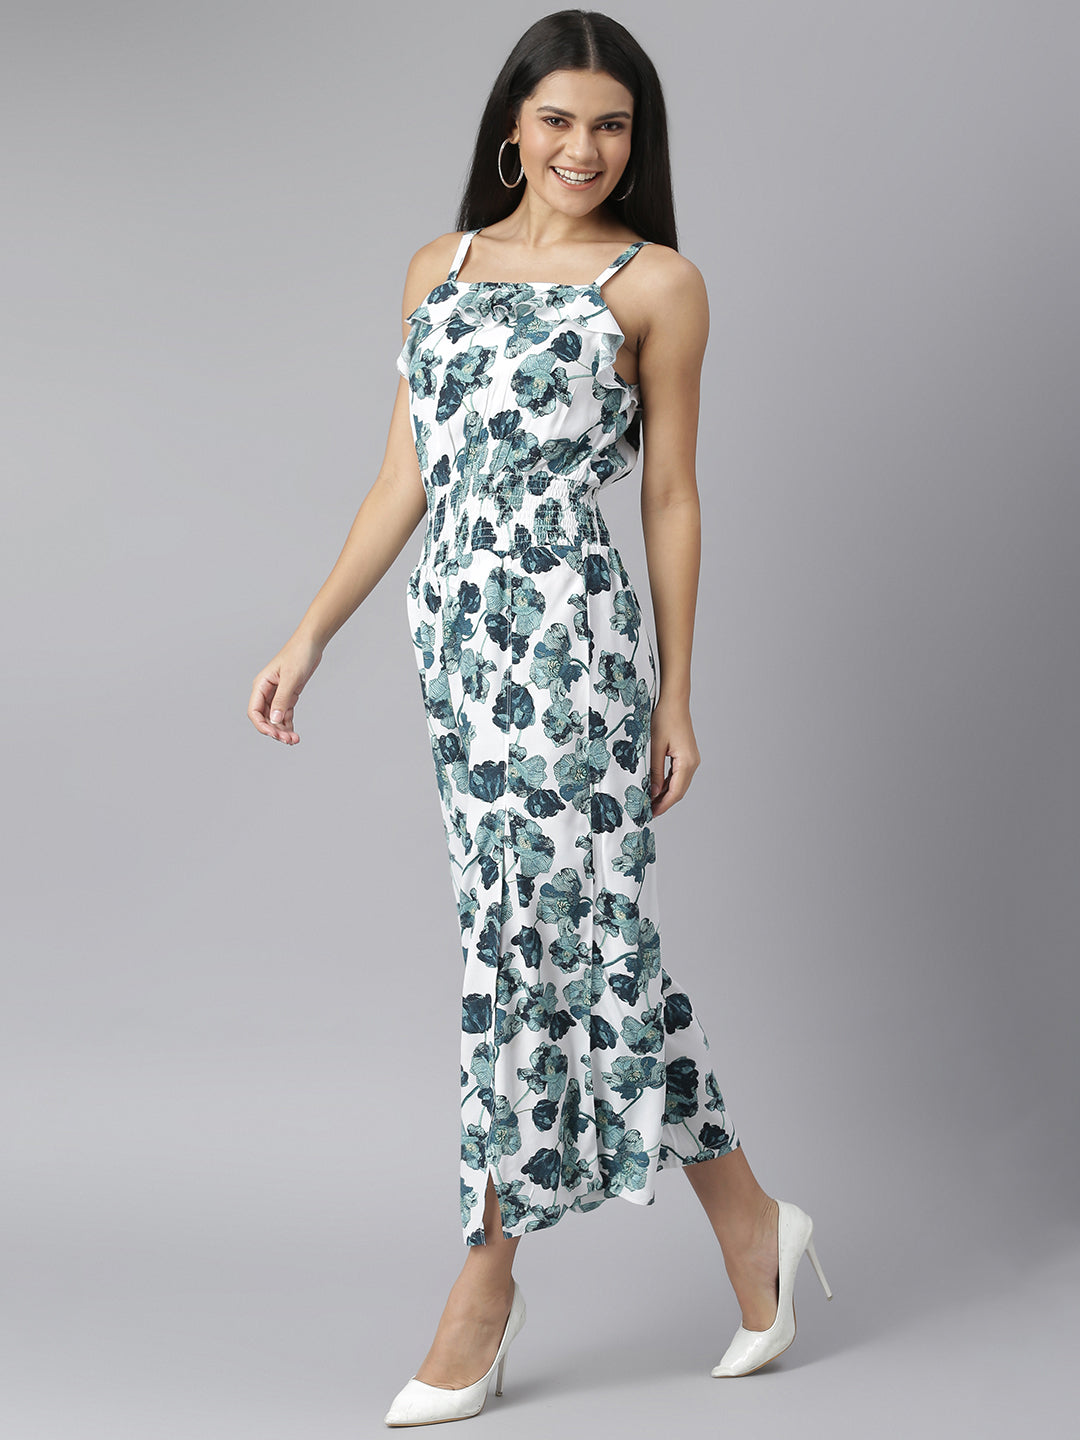 Green-&-White-Polyester-Jumpsuit-With-Slit-Pants